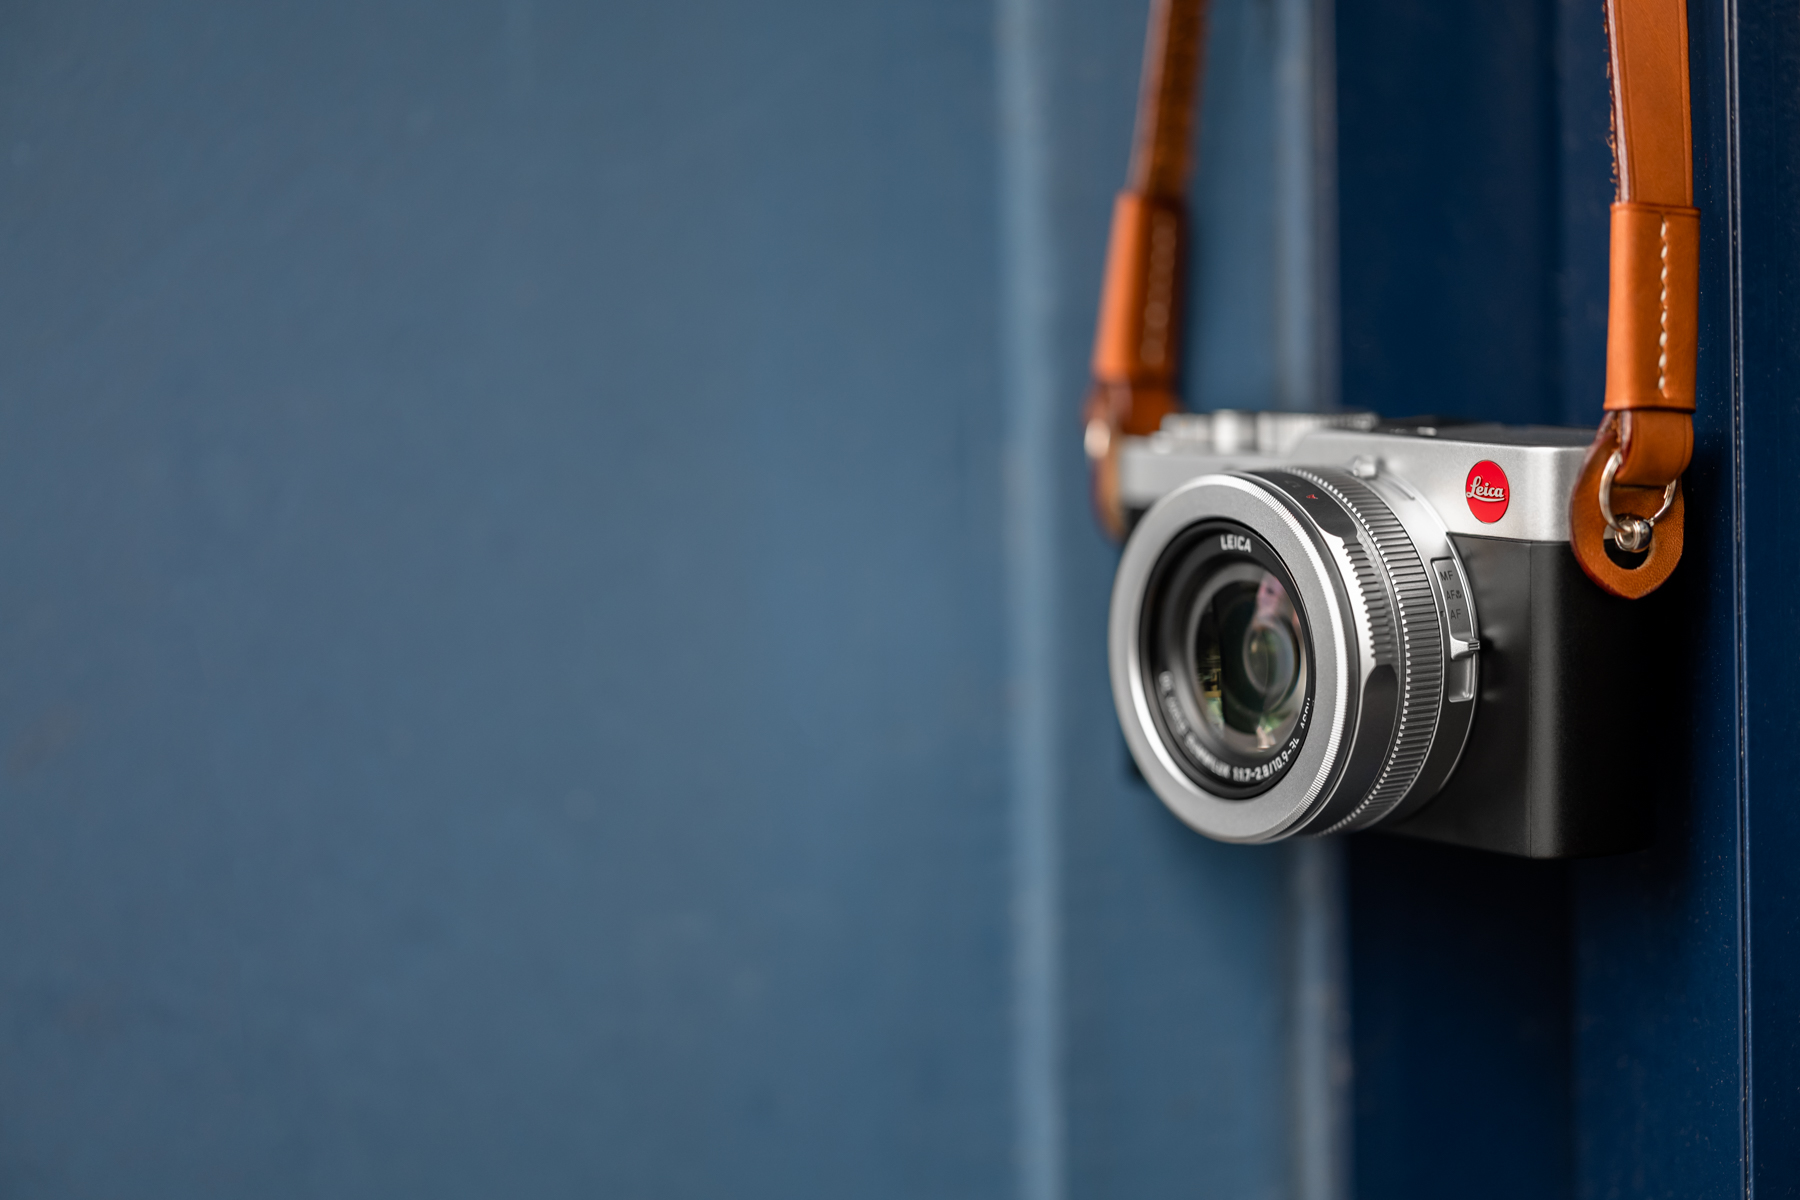 Leica D-Lux 7 “Review” –